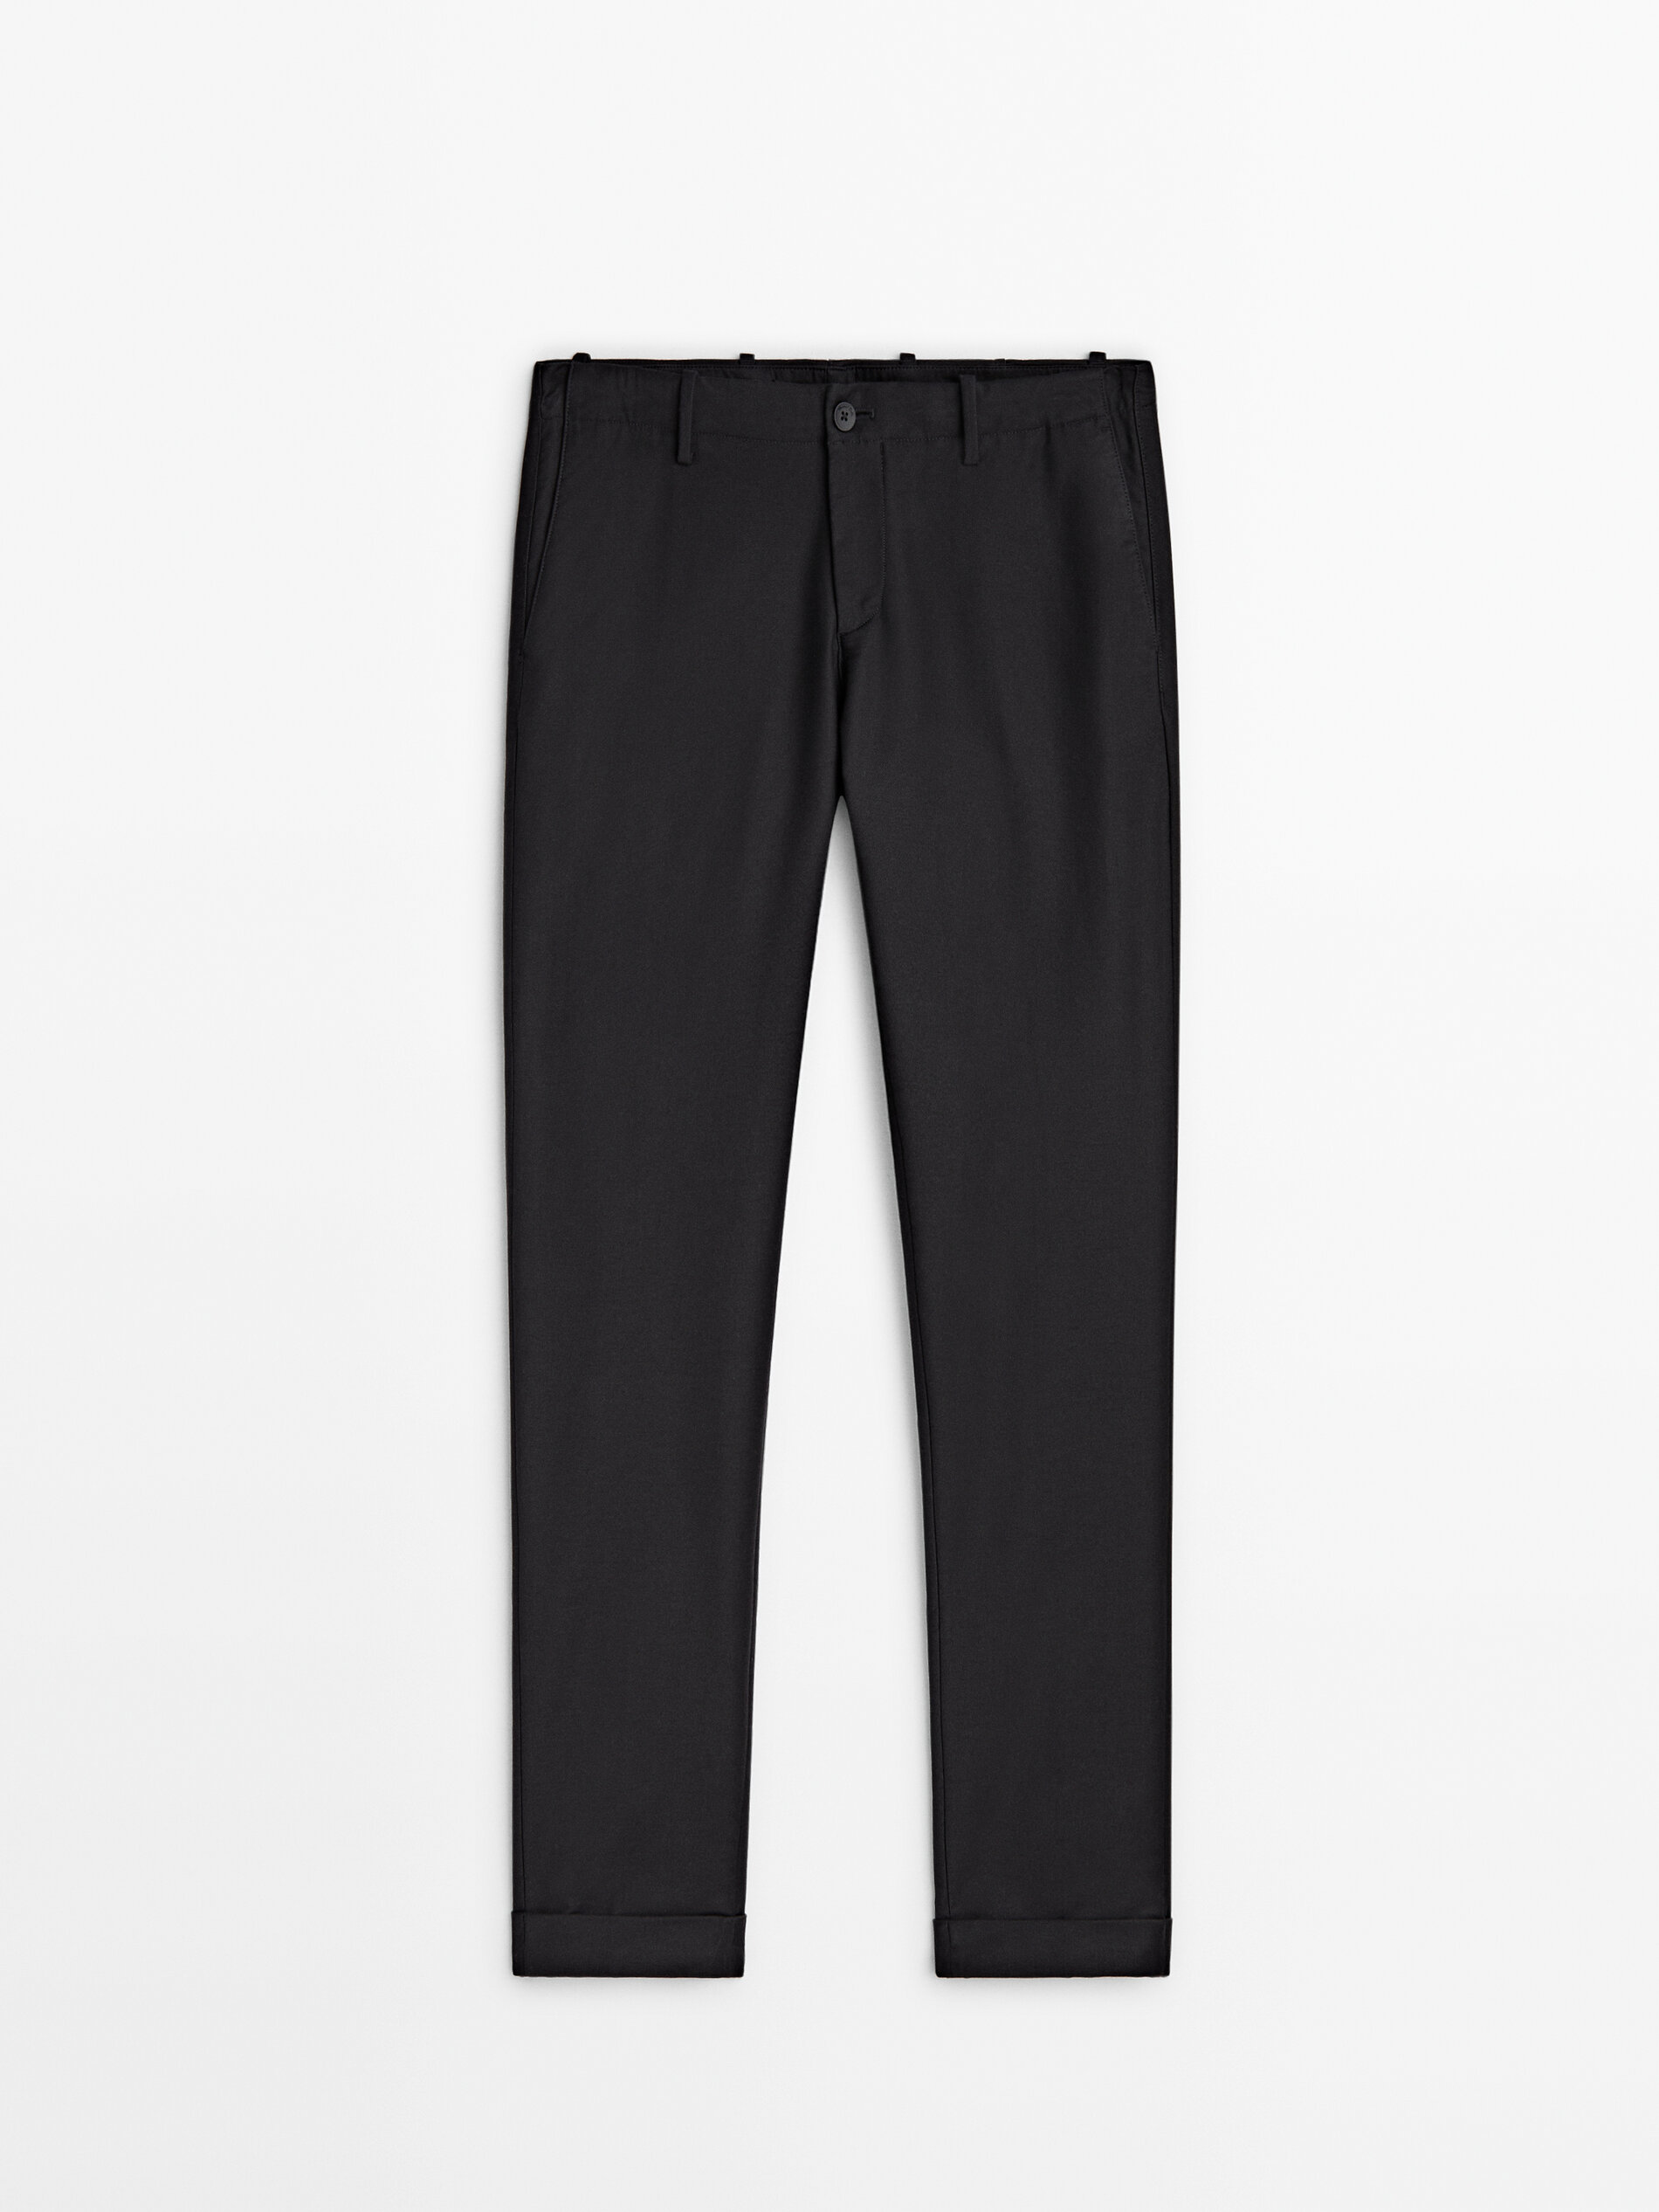 Men's Straight Fit Comfort-First Knockabout Chino Pants | Lands' End